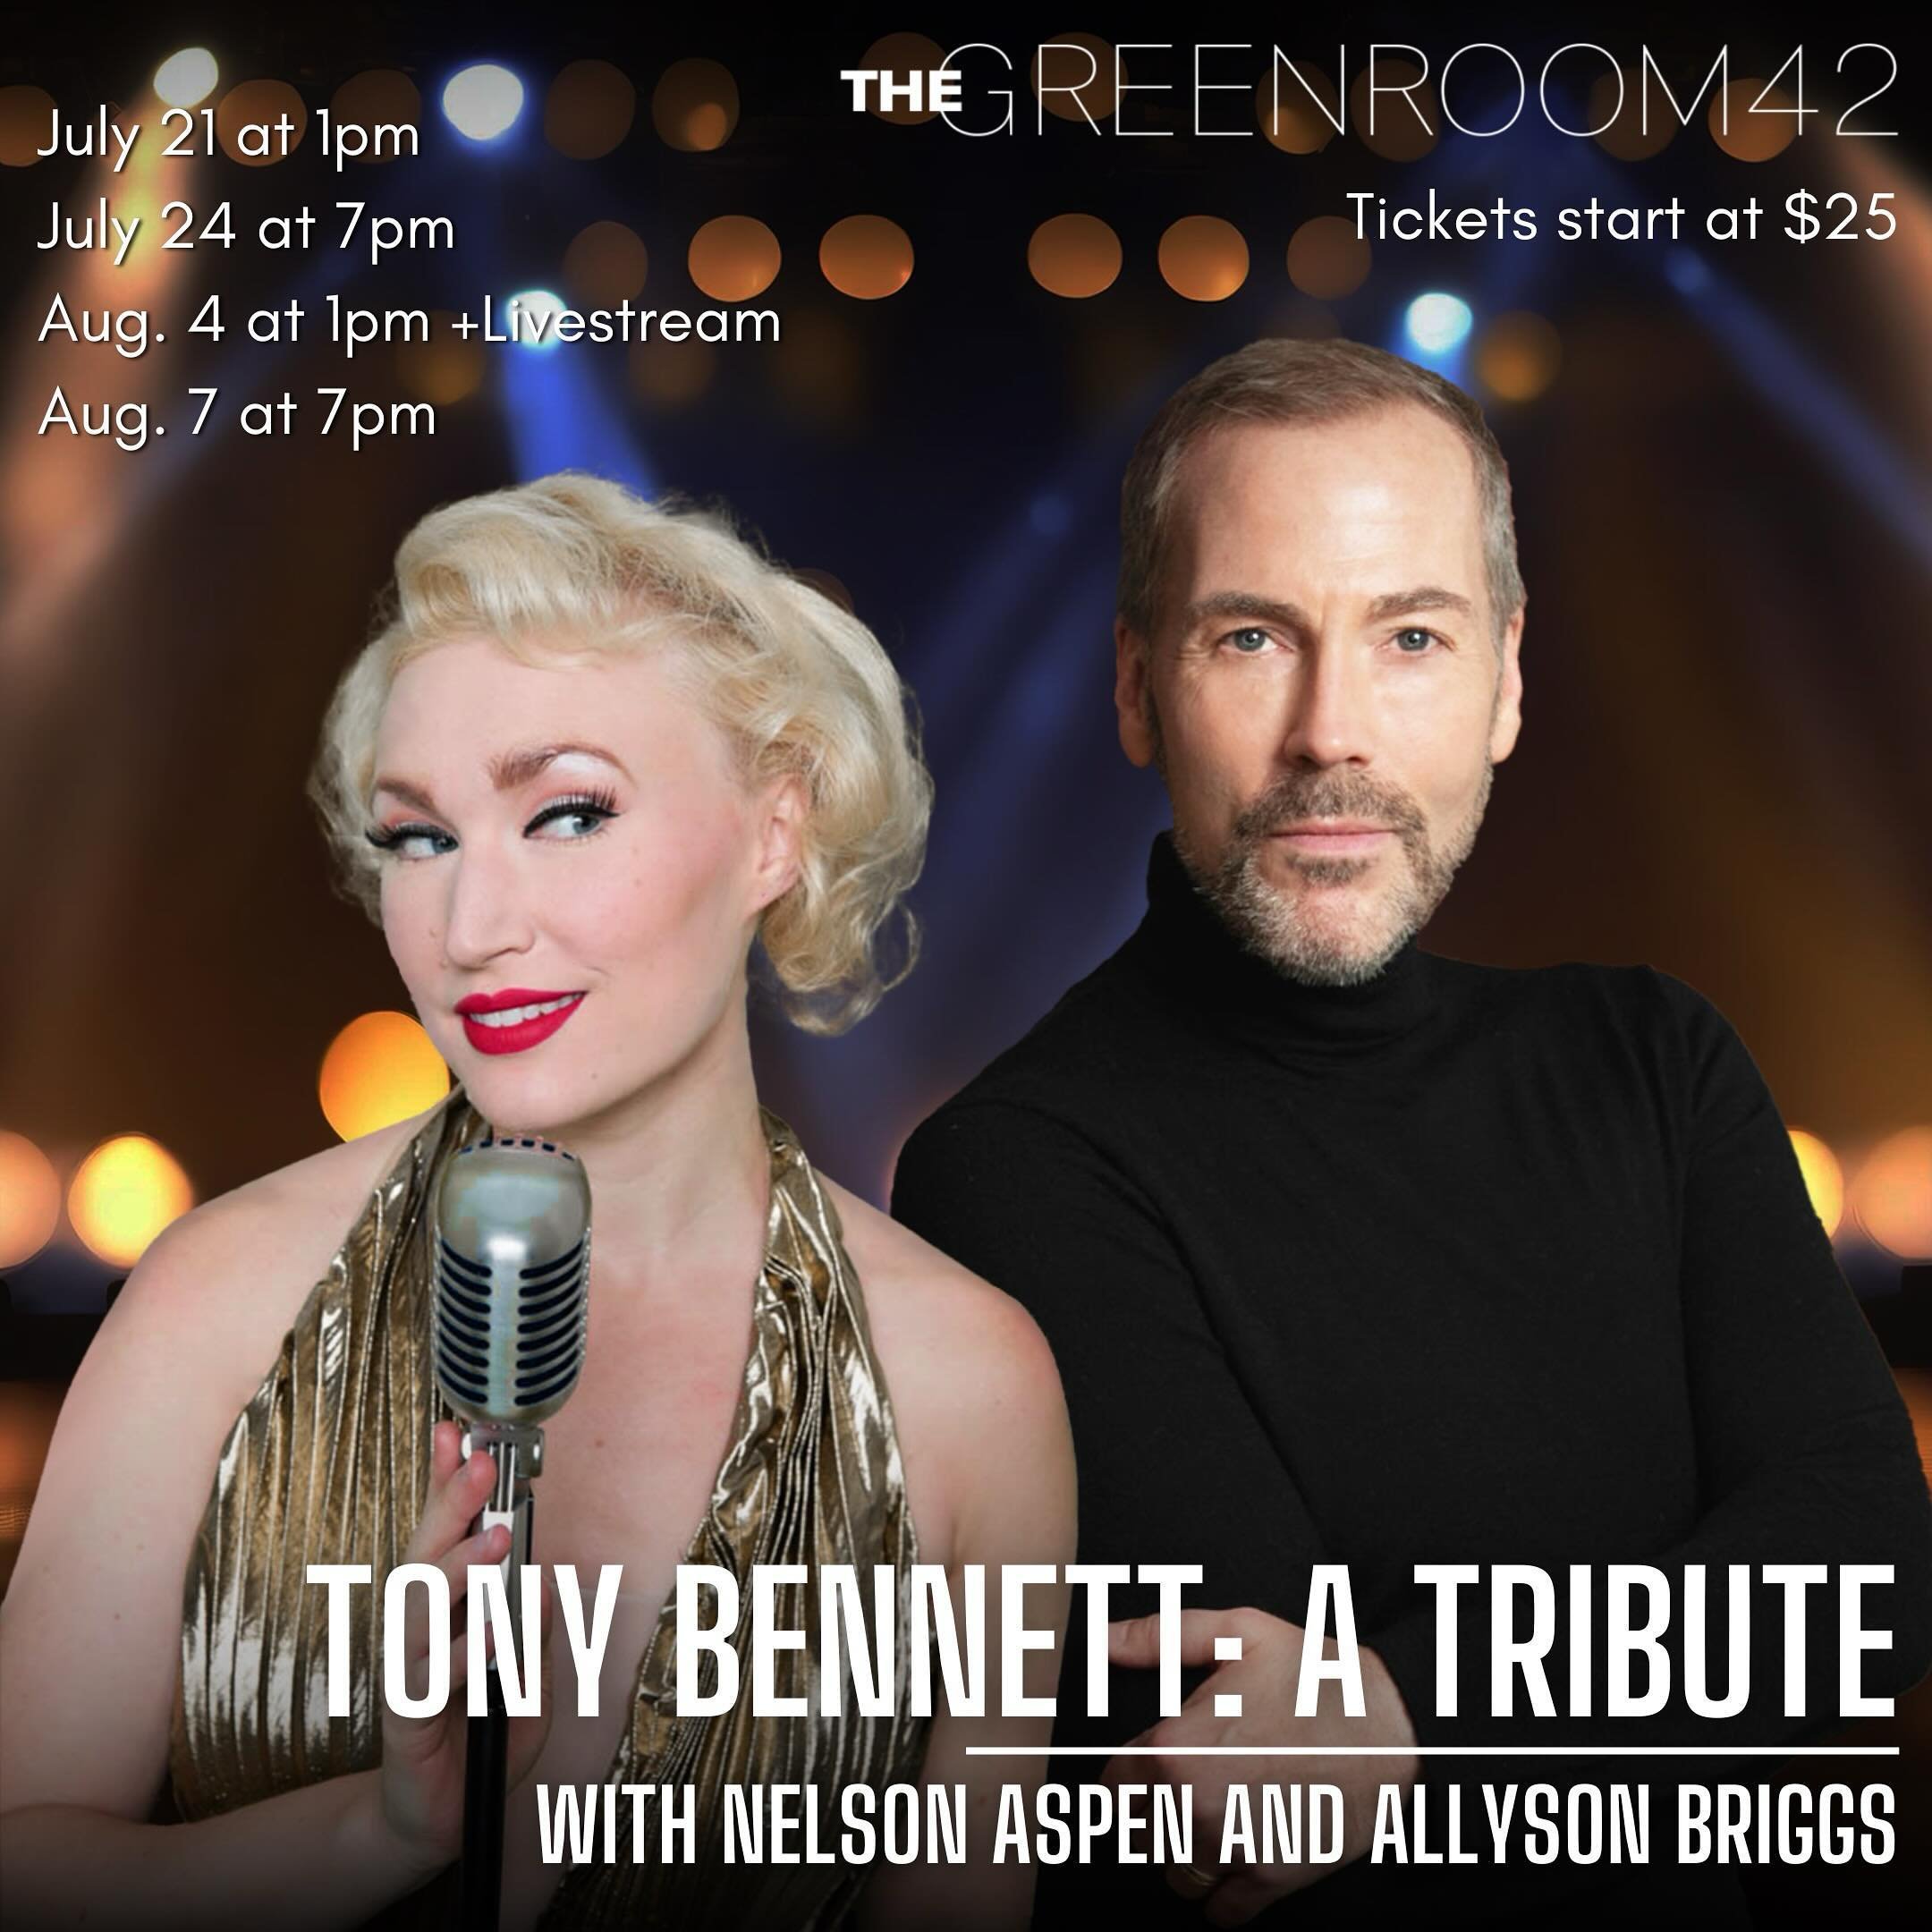 New York, New York: Here we come! 
A TRIBUTE TO TONY BENNETT WITH NELSON ASPEN AND ALLYSON BRIGGS
Multiple Dates this summer at The Green Room 42. 
Tickets in my bio and on my website!